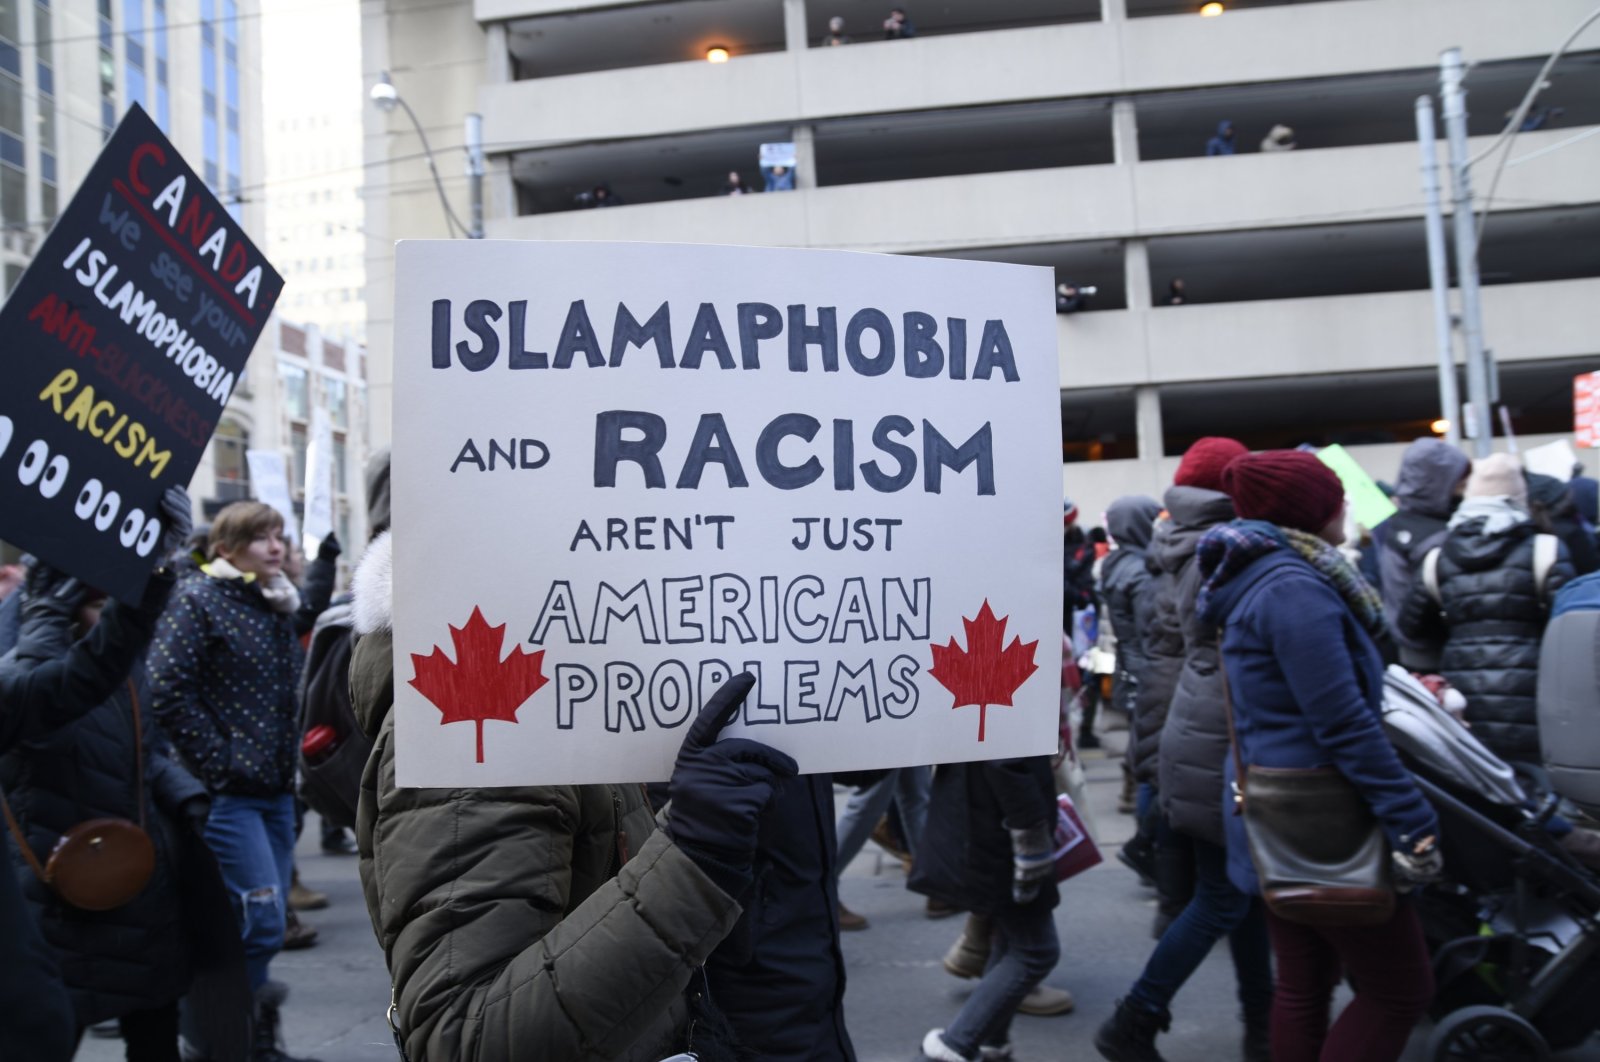 People with posters rejecting racism and Islamophobia during a rally in Toronto, Canada, Feb. 4, 2017. (AP Photo)